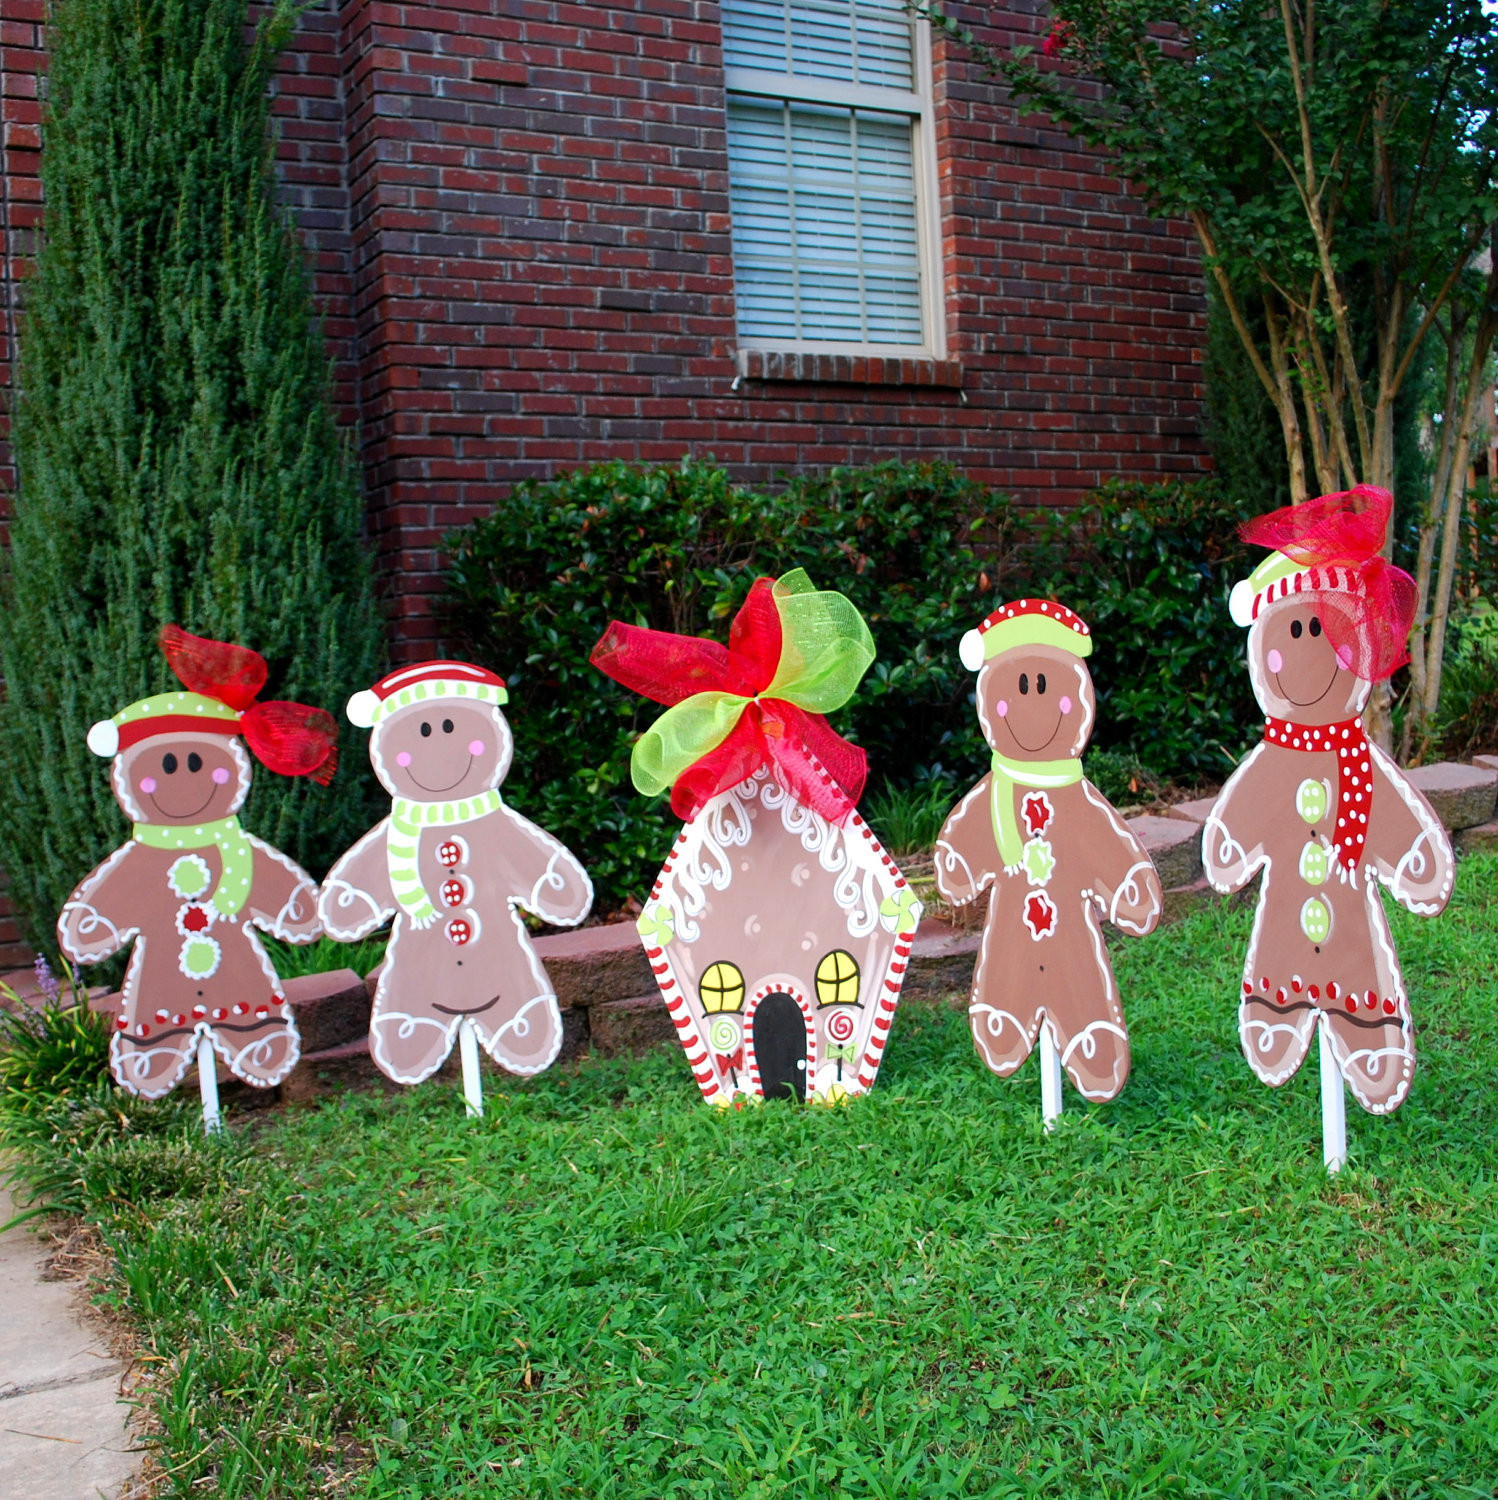 Gingerbread Outdoor Christmas Decorations
 Christmas Yard Decor Gingerbread Man Christmas Decor